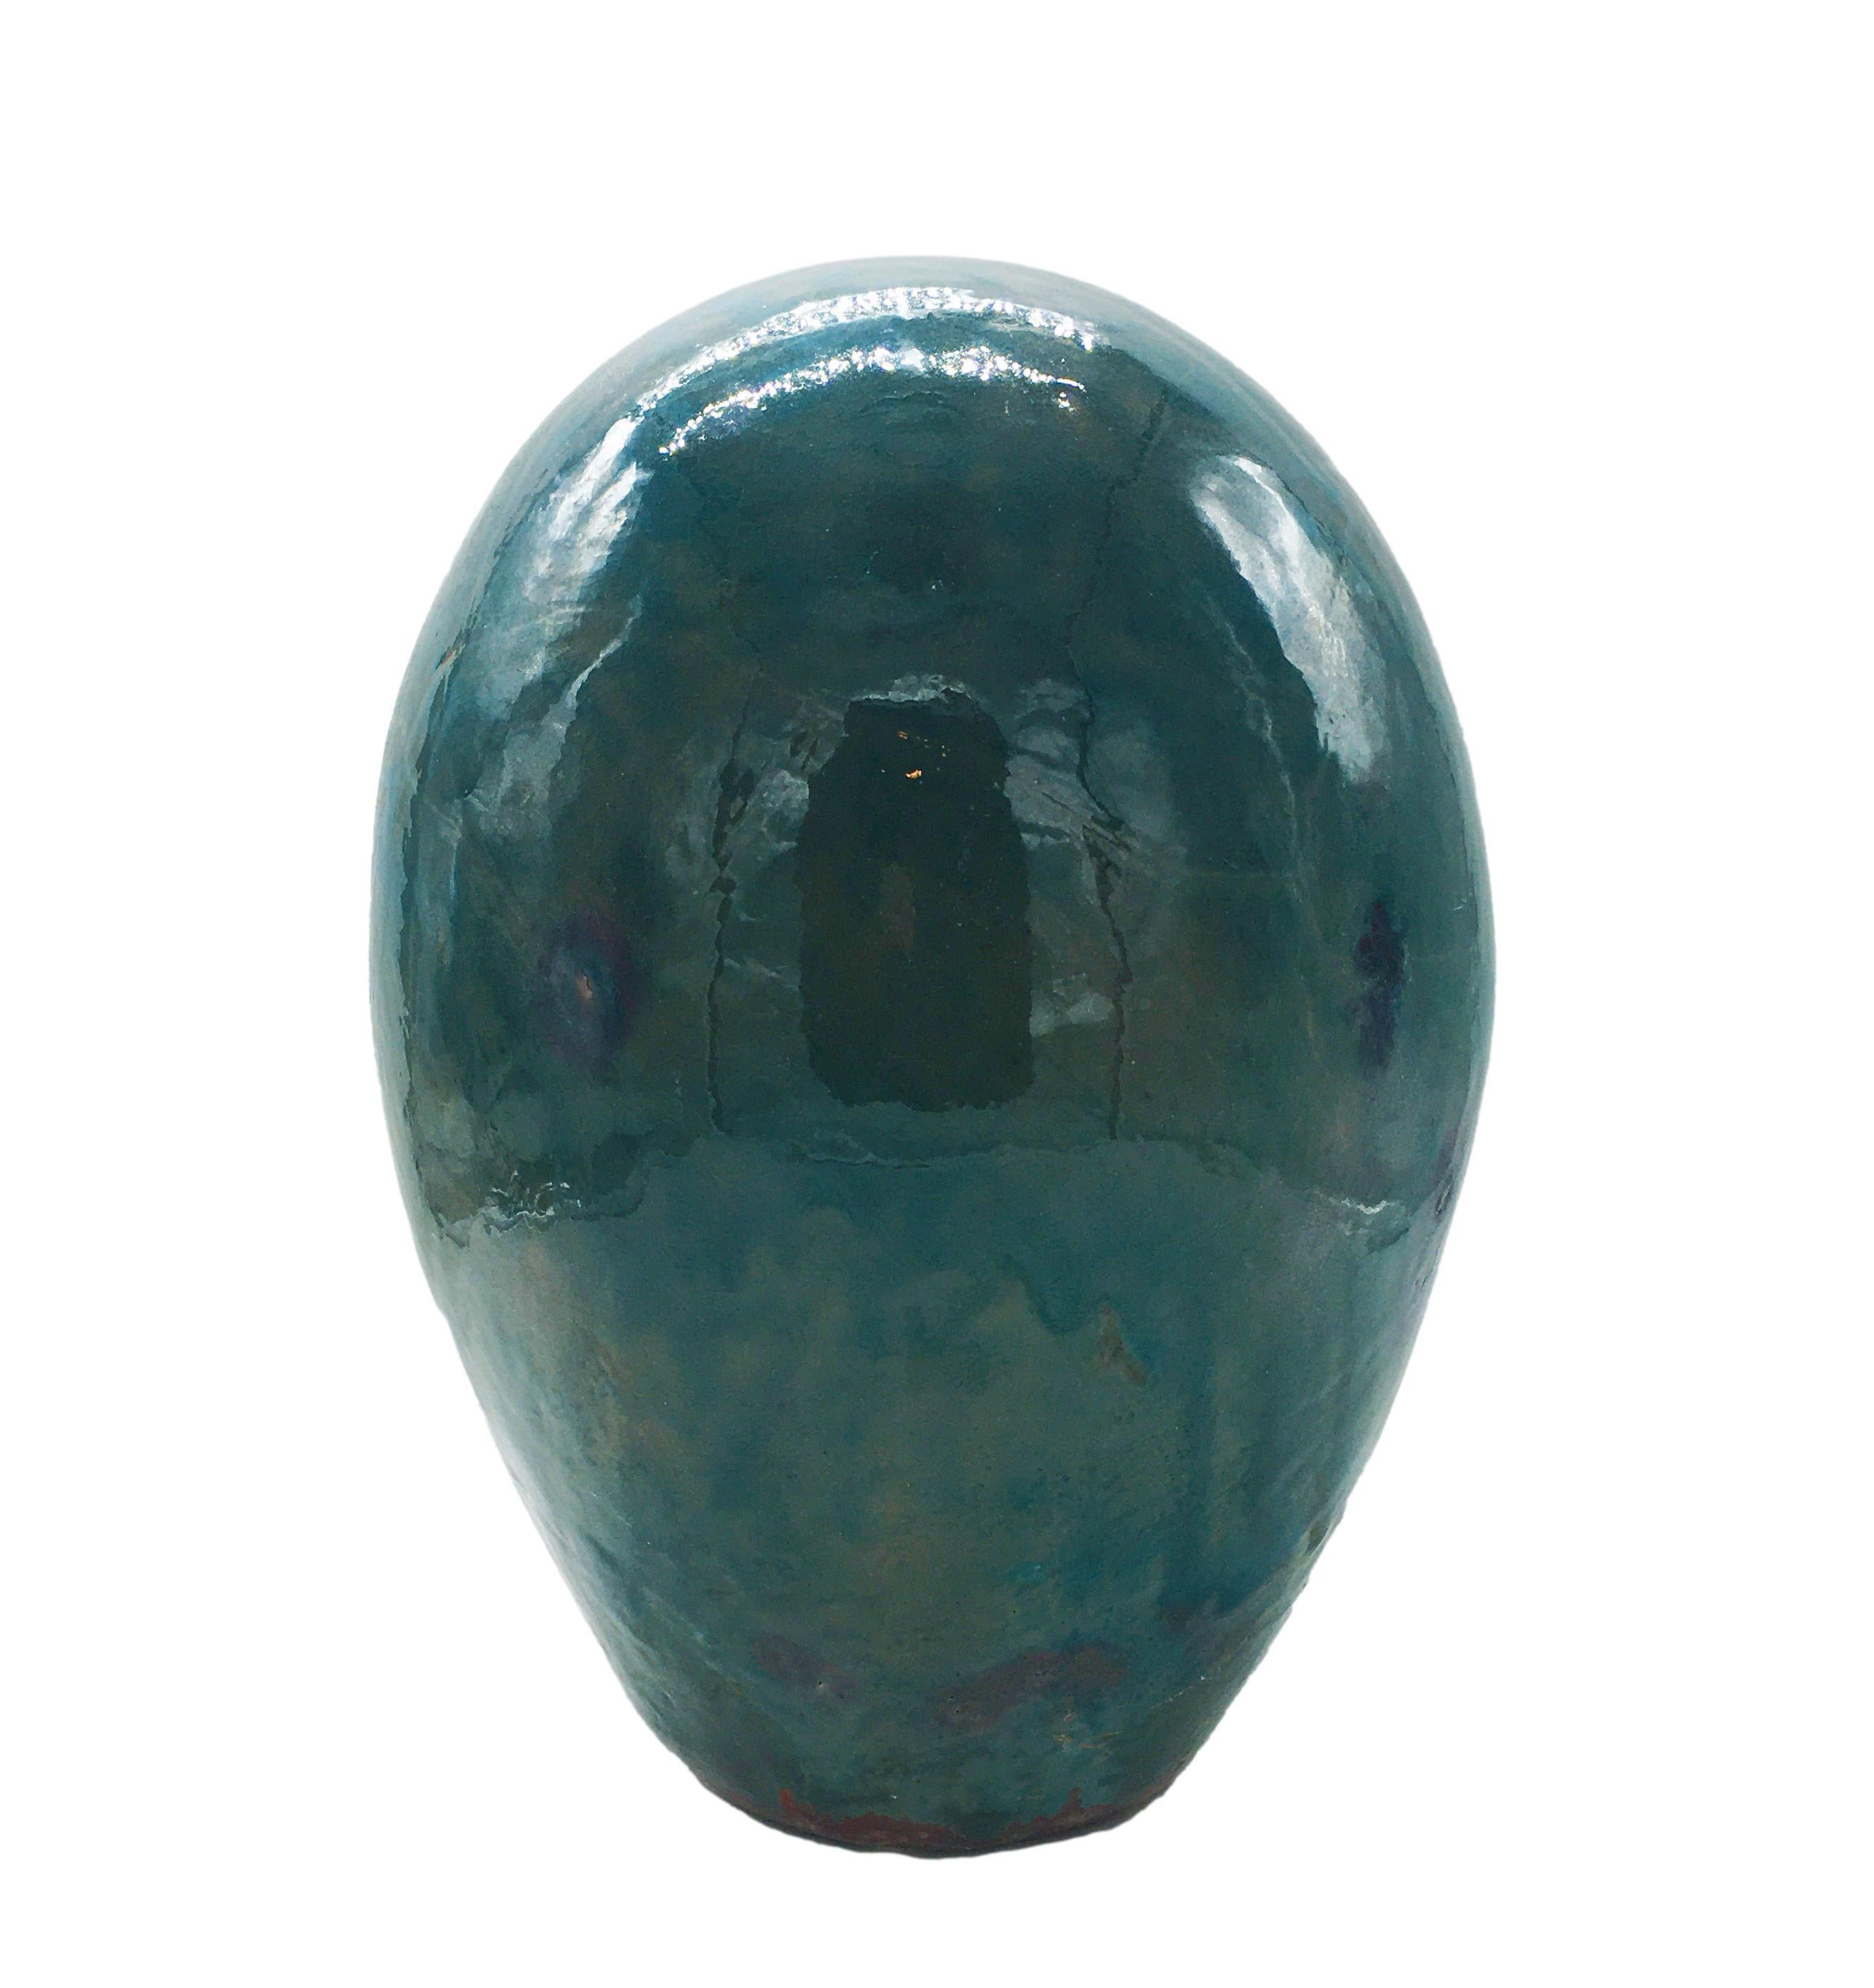 Original and emblematic sculpture in green glazed terracotta of oval shape, Made in Italy 1960.